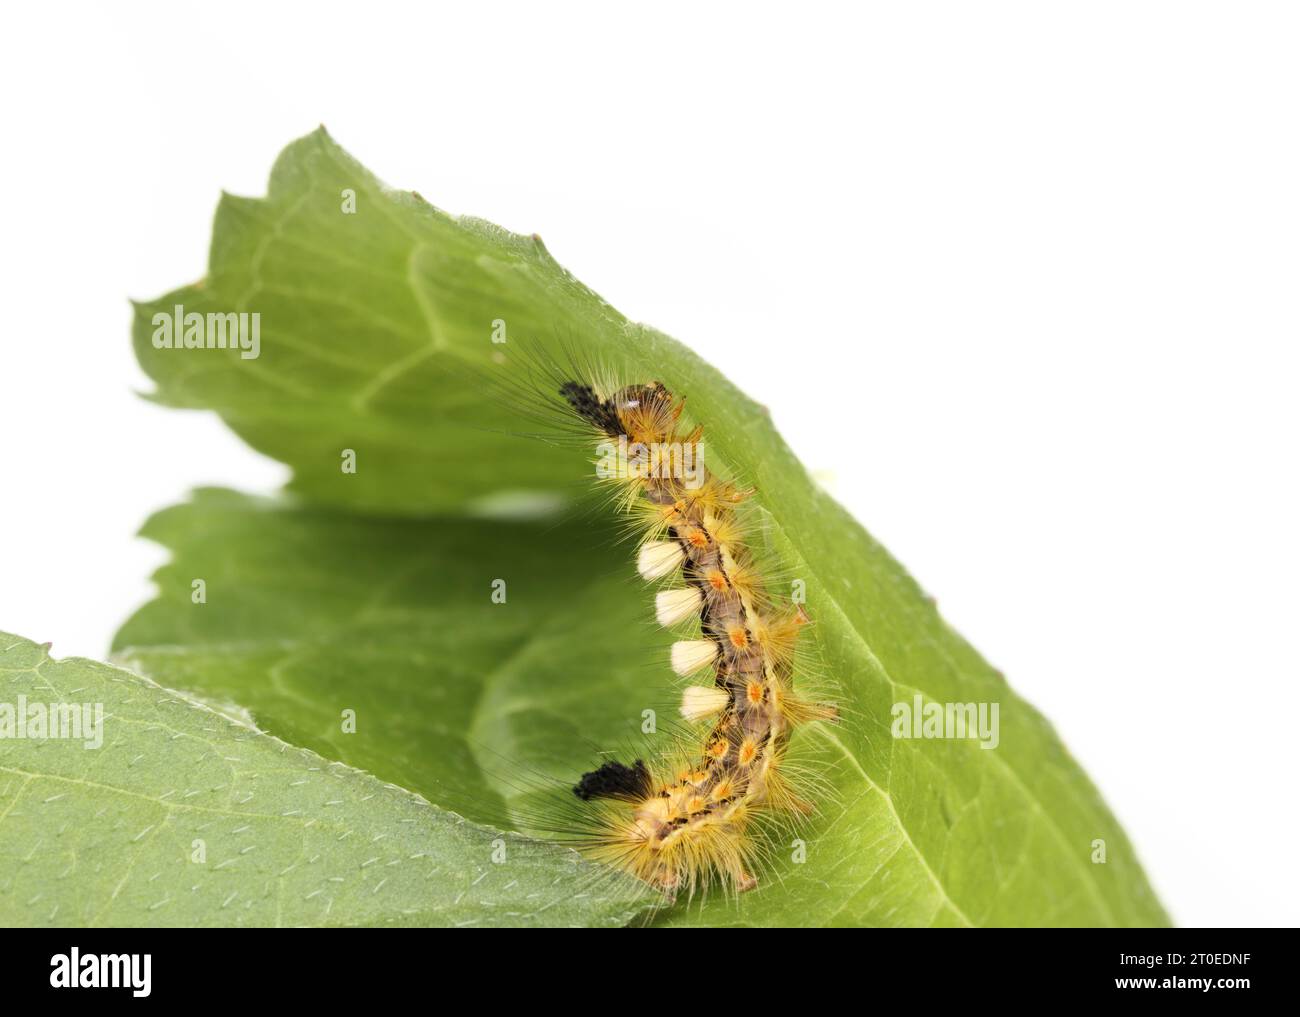 Fuzzy caterpillar on leaf. Side profile or rusty tussock moth caterpillar or Orgyia antiqua (L.) Long yellow hairs, orange dots and tufts. Stinging ha Stock Photo